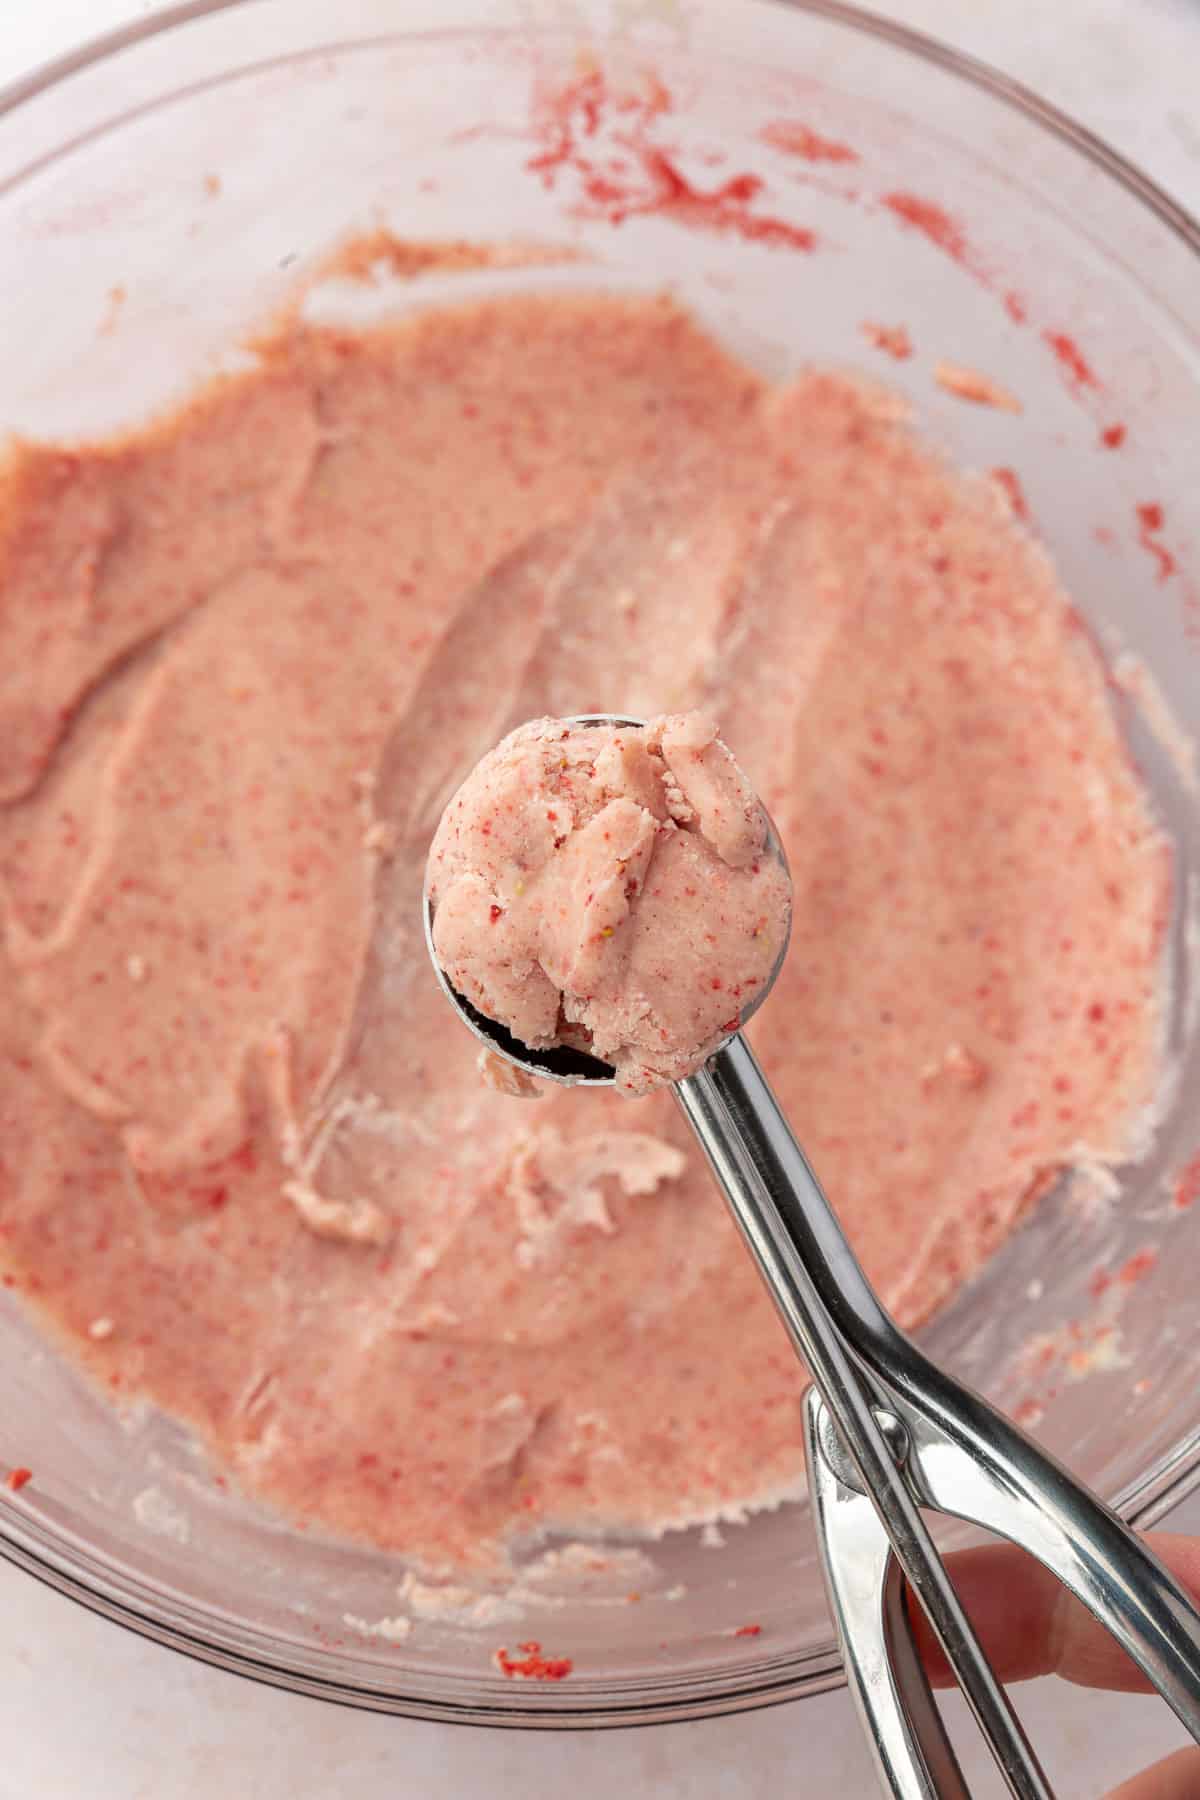 A stainless steel scooper filled with strawberry truffle over a glass bowl of more strawberry white chocolate truffle dough.